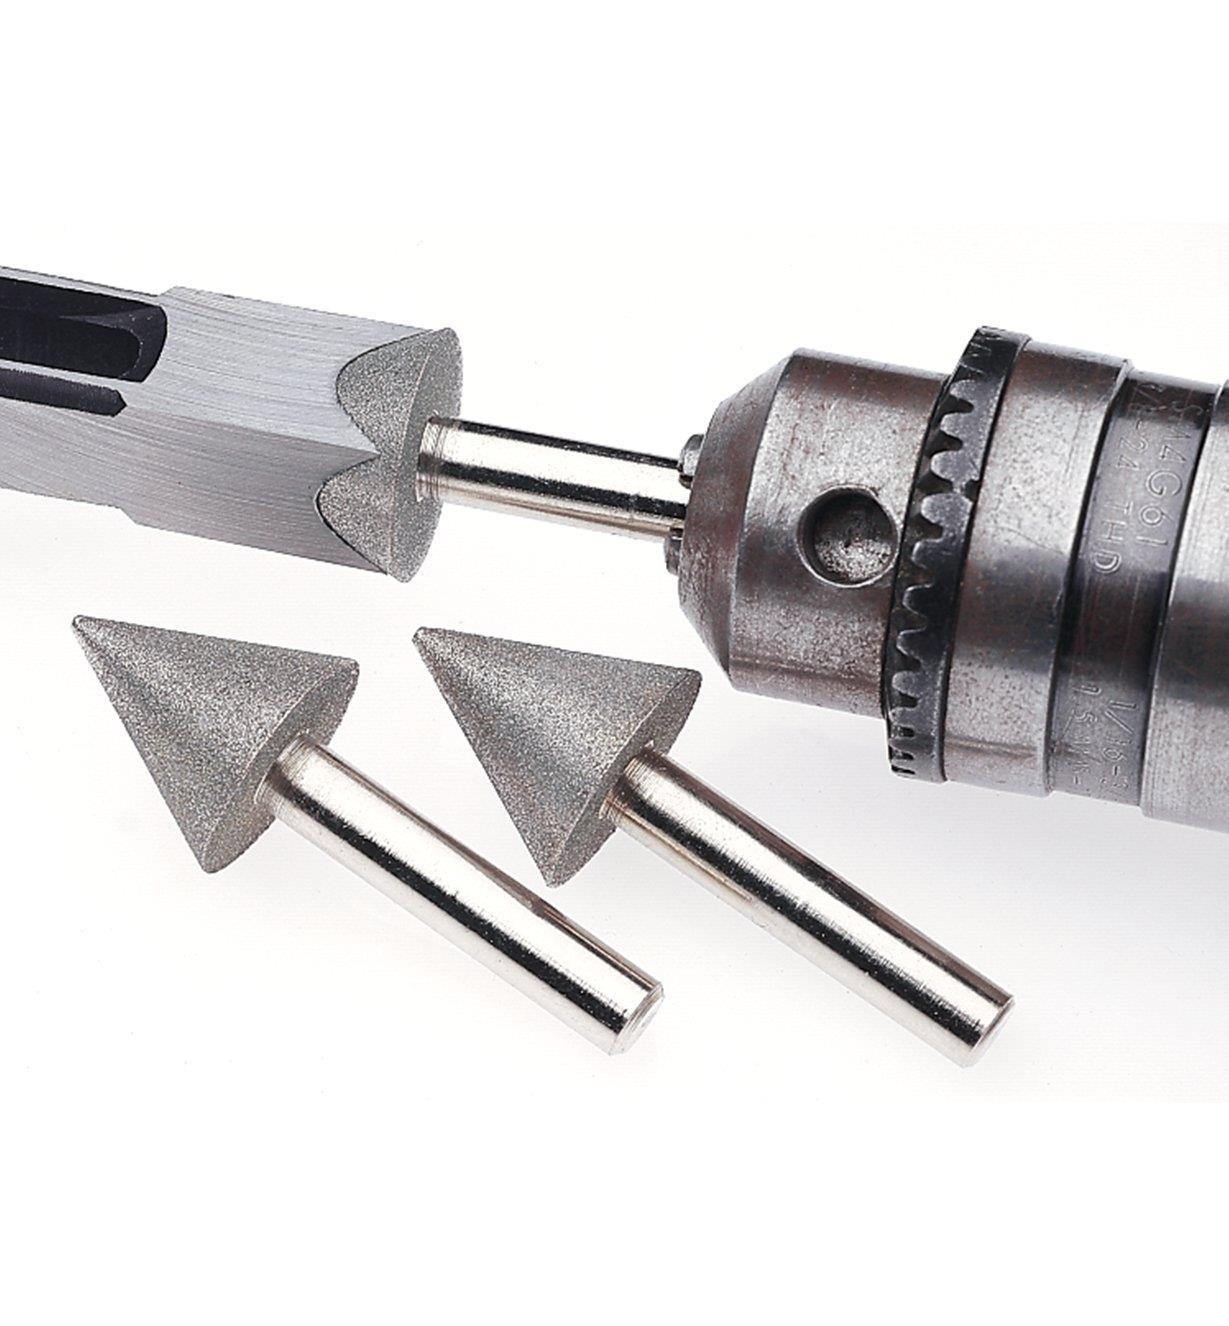 Conical sharpener in a drill being used to sharpen a hollow mortise chisel bit